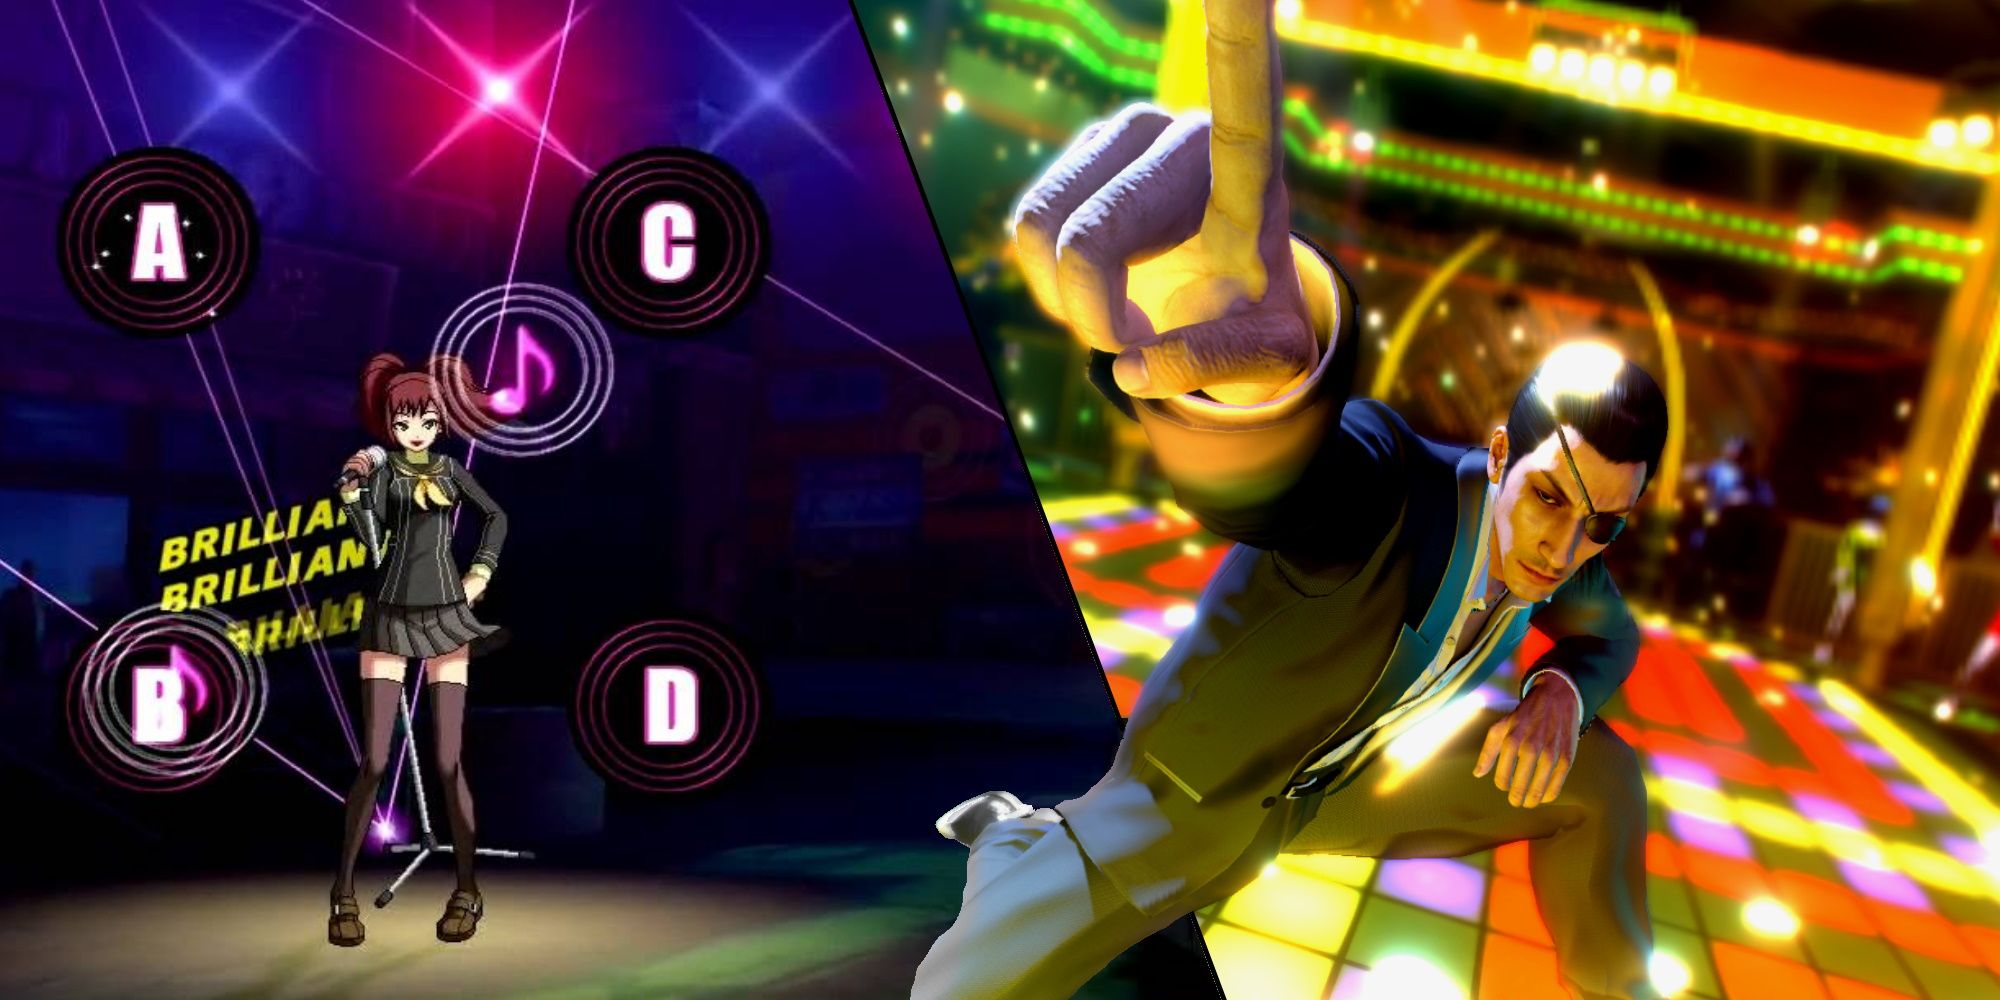 Rhythm Mini-Game Featured Image (featuring Rise from Persona 4 Arena Ultimax and Majima from Yakuza Zero)